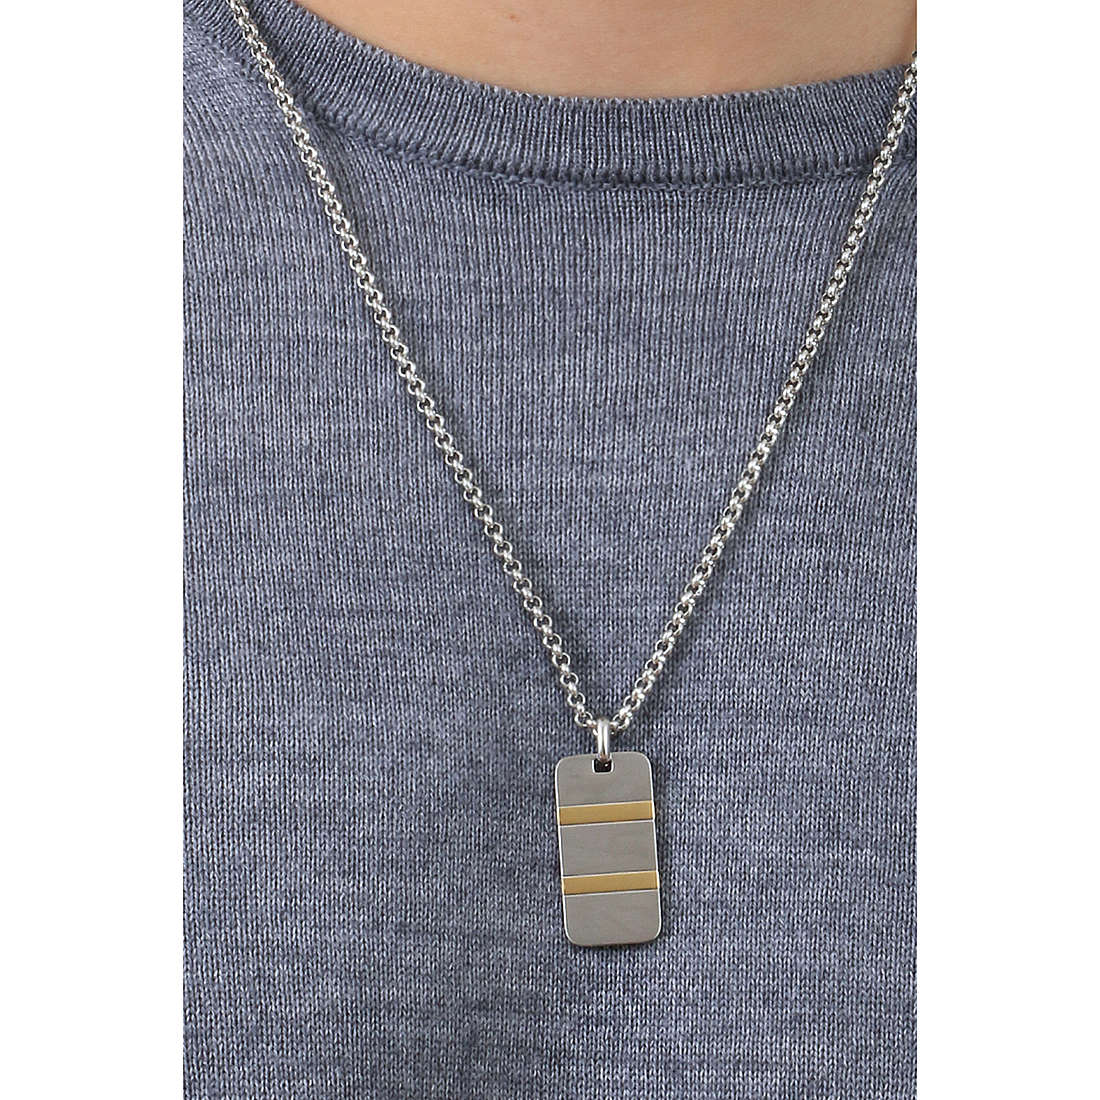 Sector necklaces Basic man SZS80 wearing